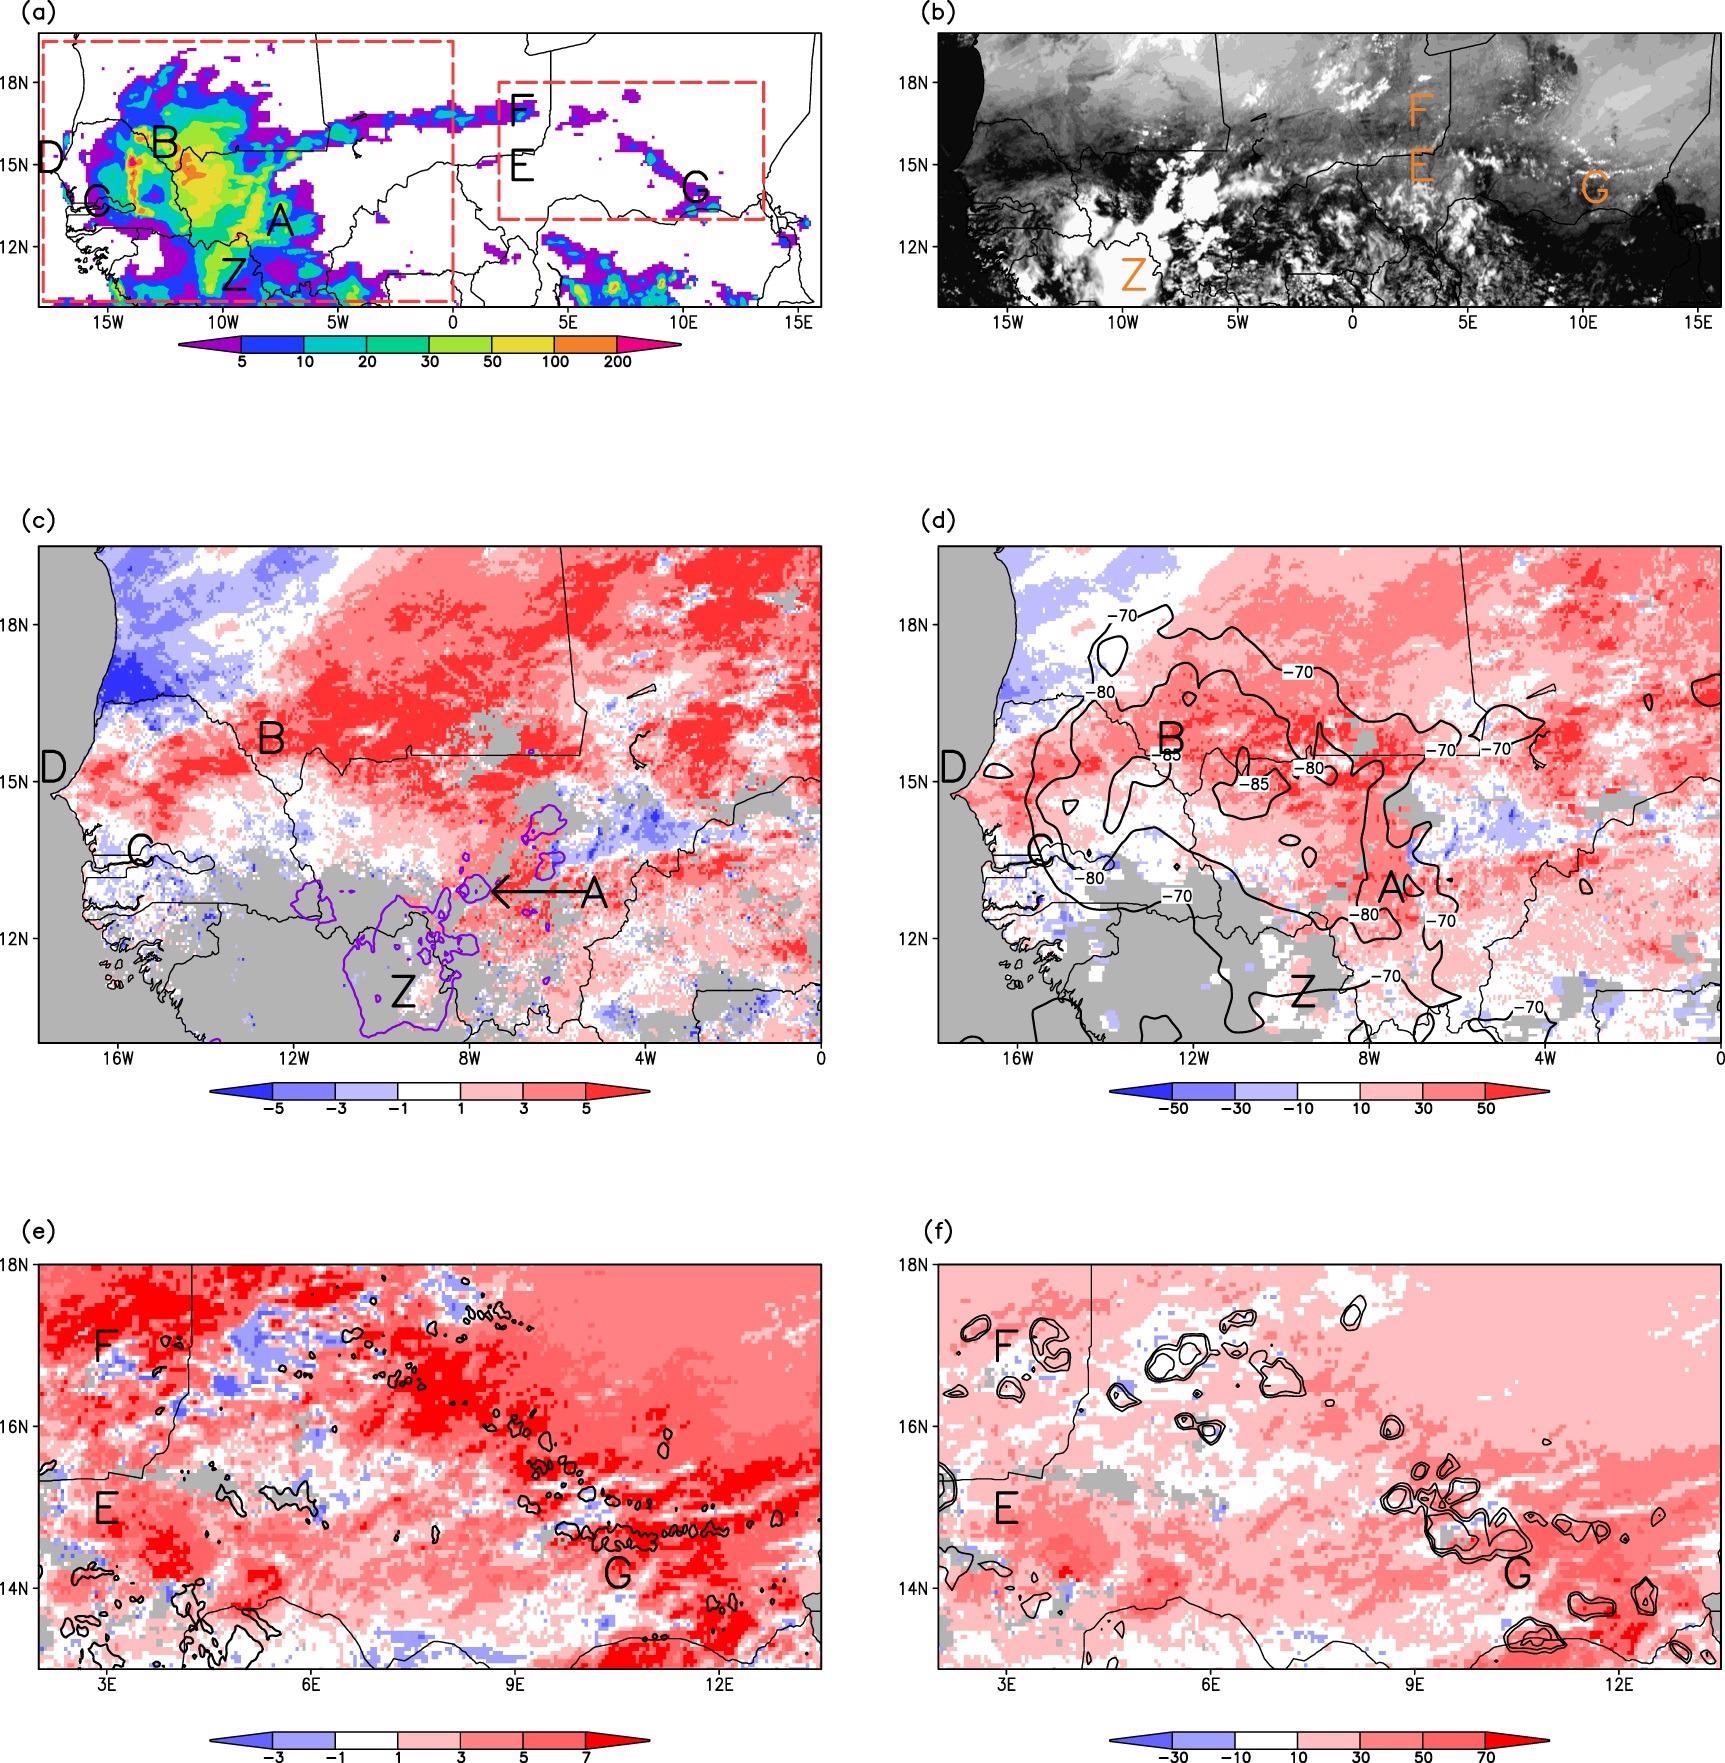 Satellite data from the Testbed case study day of 15 September. (a) IMERG late run accumulated rainfall (mm) 1300–2400 UTC. (b) Visible channel data at 1300 UTC. Major MCS over Western Sahel (c), (d). (c) Initiating (‘A’) and decaying (‘Z’) MCSs at 1230 UTC are depicted by contours at -80 °C and -70 °C, with shading depicting LSTA (K). (d) Non-local land modification factor (%; valid at 1800 UTC) and minimum cloud-top temperature (-85 °C, -80 °C, -70 °C contours) between 1400 and 2400 UTC. Initiation of isolated convective storms in the Central Sahel (e), (f). (e) LSTA (shading) and clouds were detected from the visible channel at 1330 UTC. (f) Local land modification factor (%, valid at 1500 UTC) and cold cloud top temperatures (-60 °C, -40 °C, -20 °C) at 1515 UTC. In (c)–(f), grey pixels indicate no land data due to cloud cover. Additional letters denote locations defined in the text.